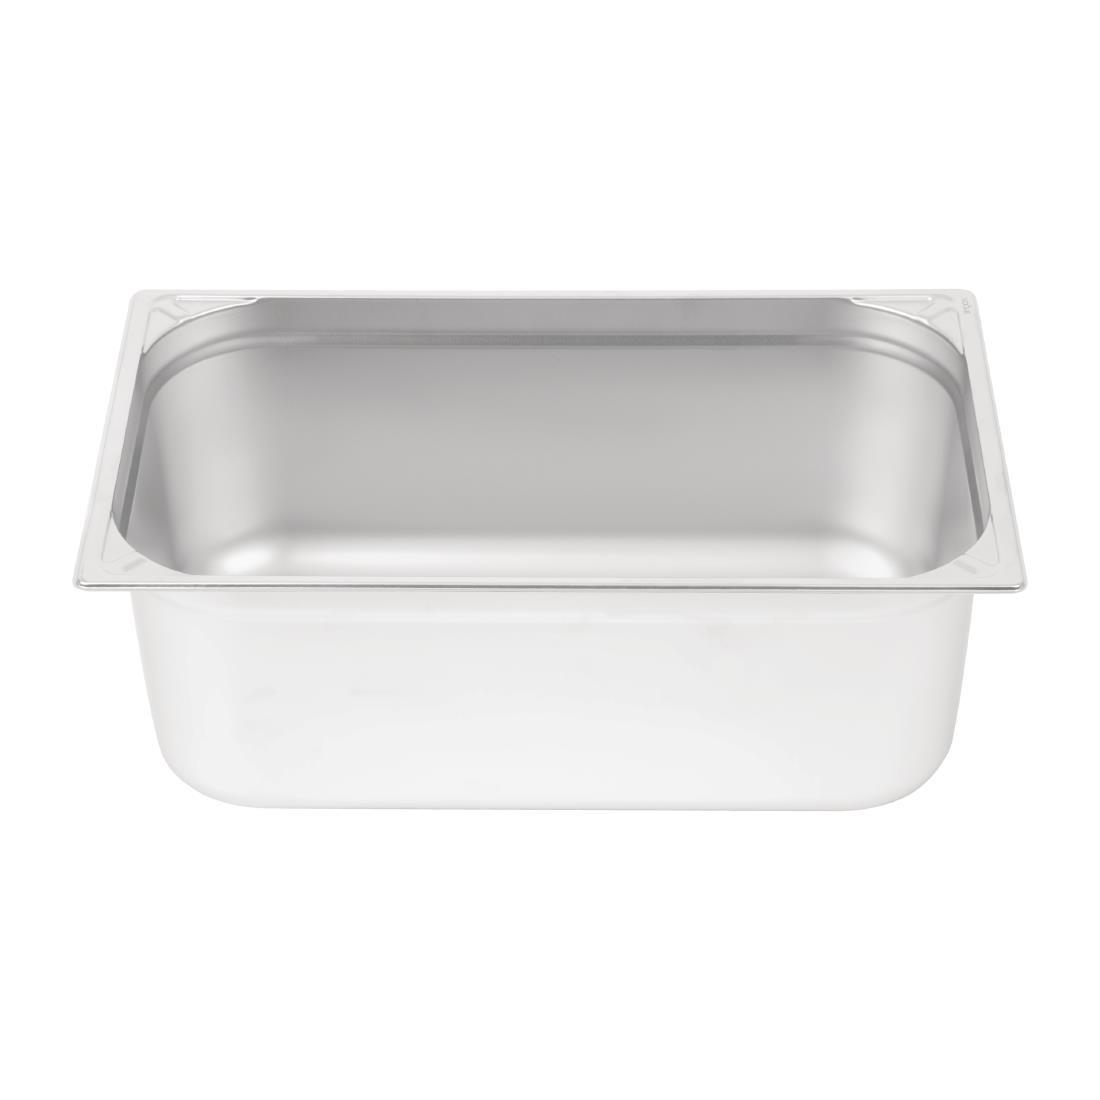 Vogue Heavy Duty Stainless Steel 1/1 Gastronorm Pan 200mm - DW436  - 2